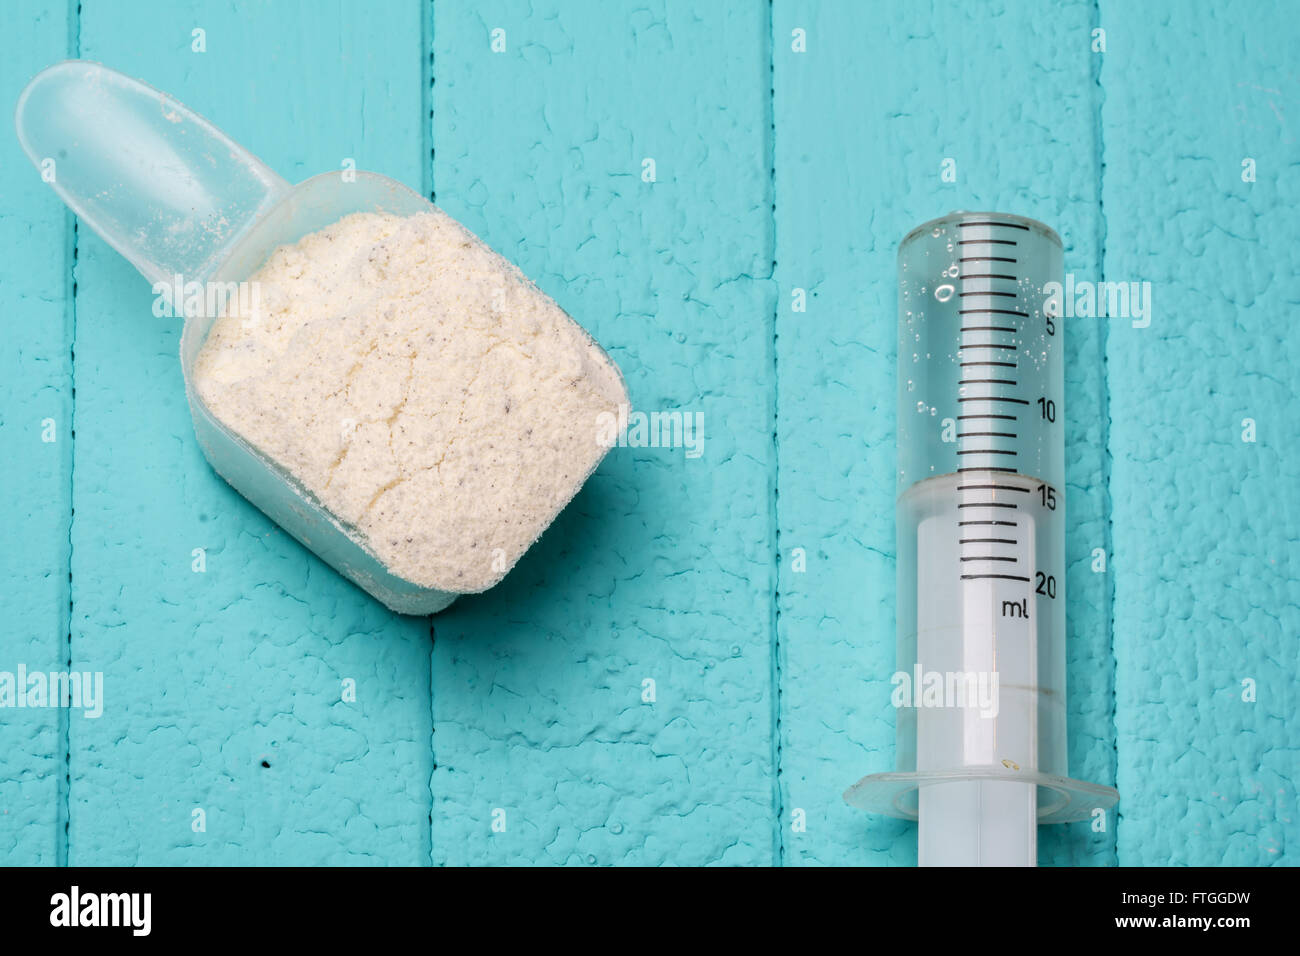 https://c8.alamy.com/comp/FTGGDW/container-of-milk-whey-protein-and-empty-injection-close-up-blue-background-FTGGDW.jpg